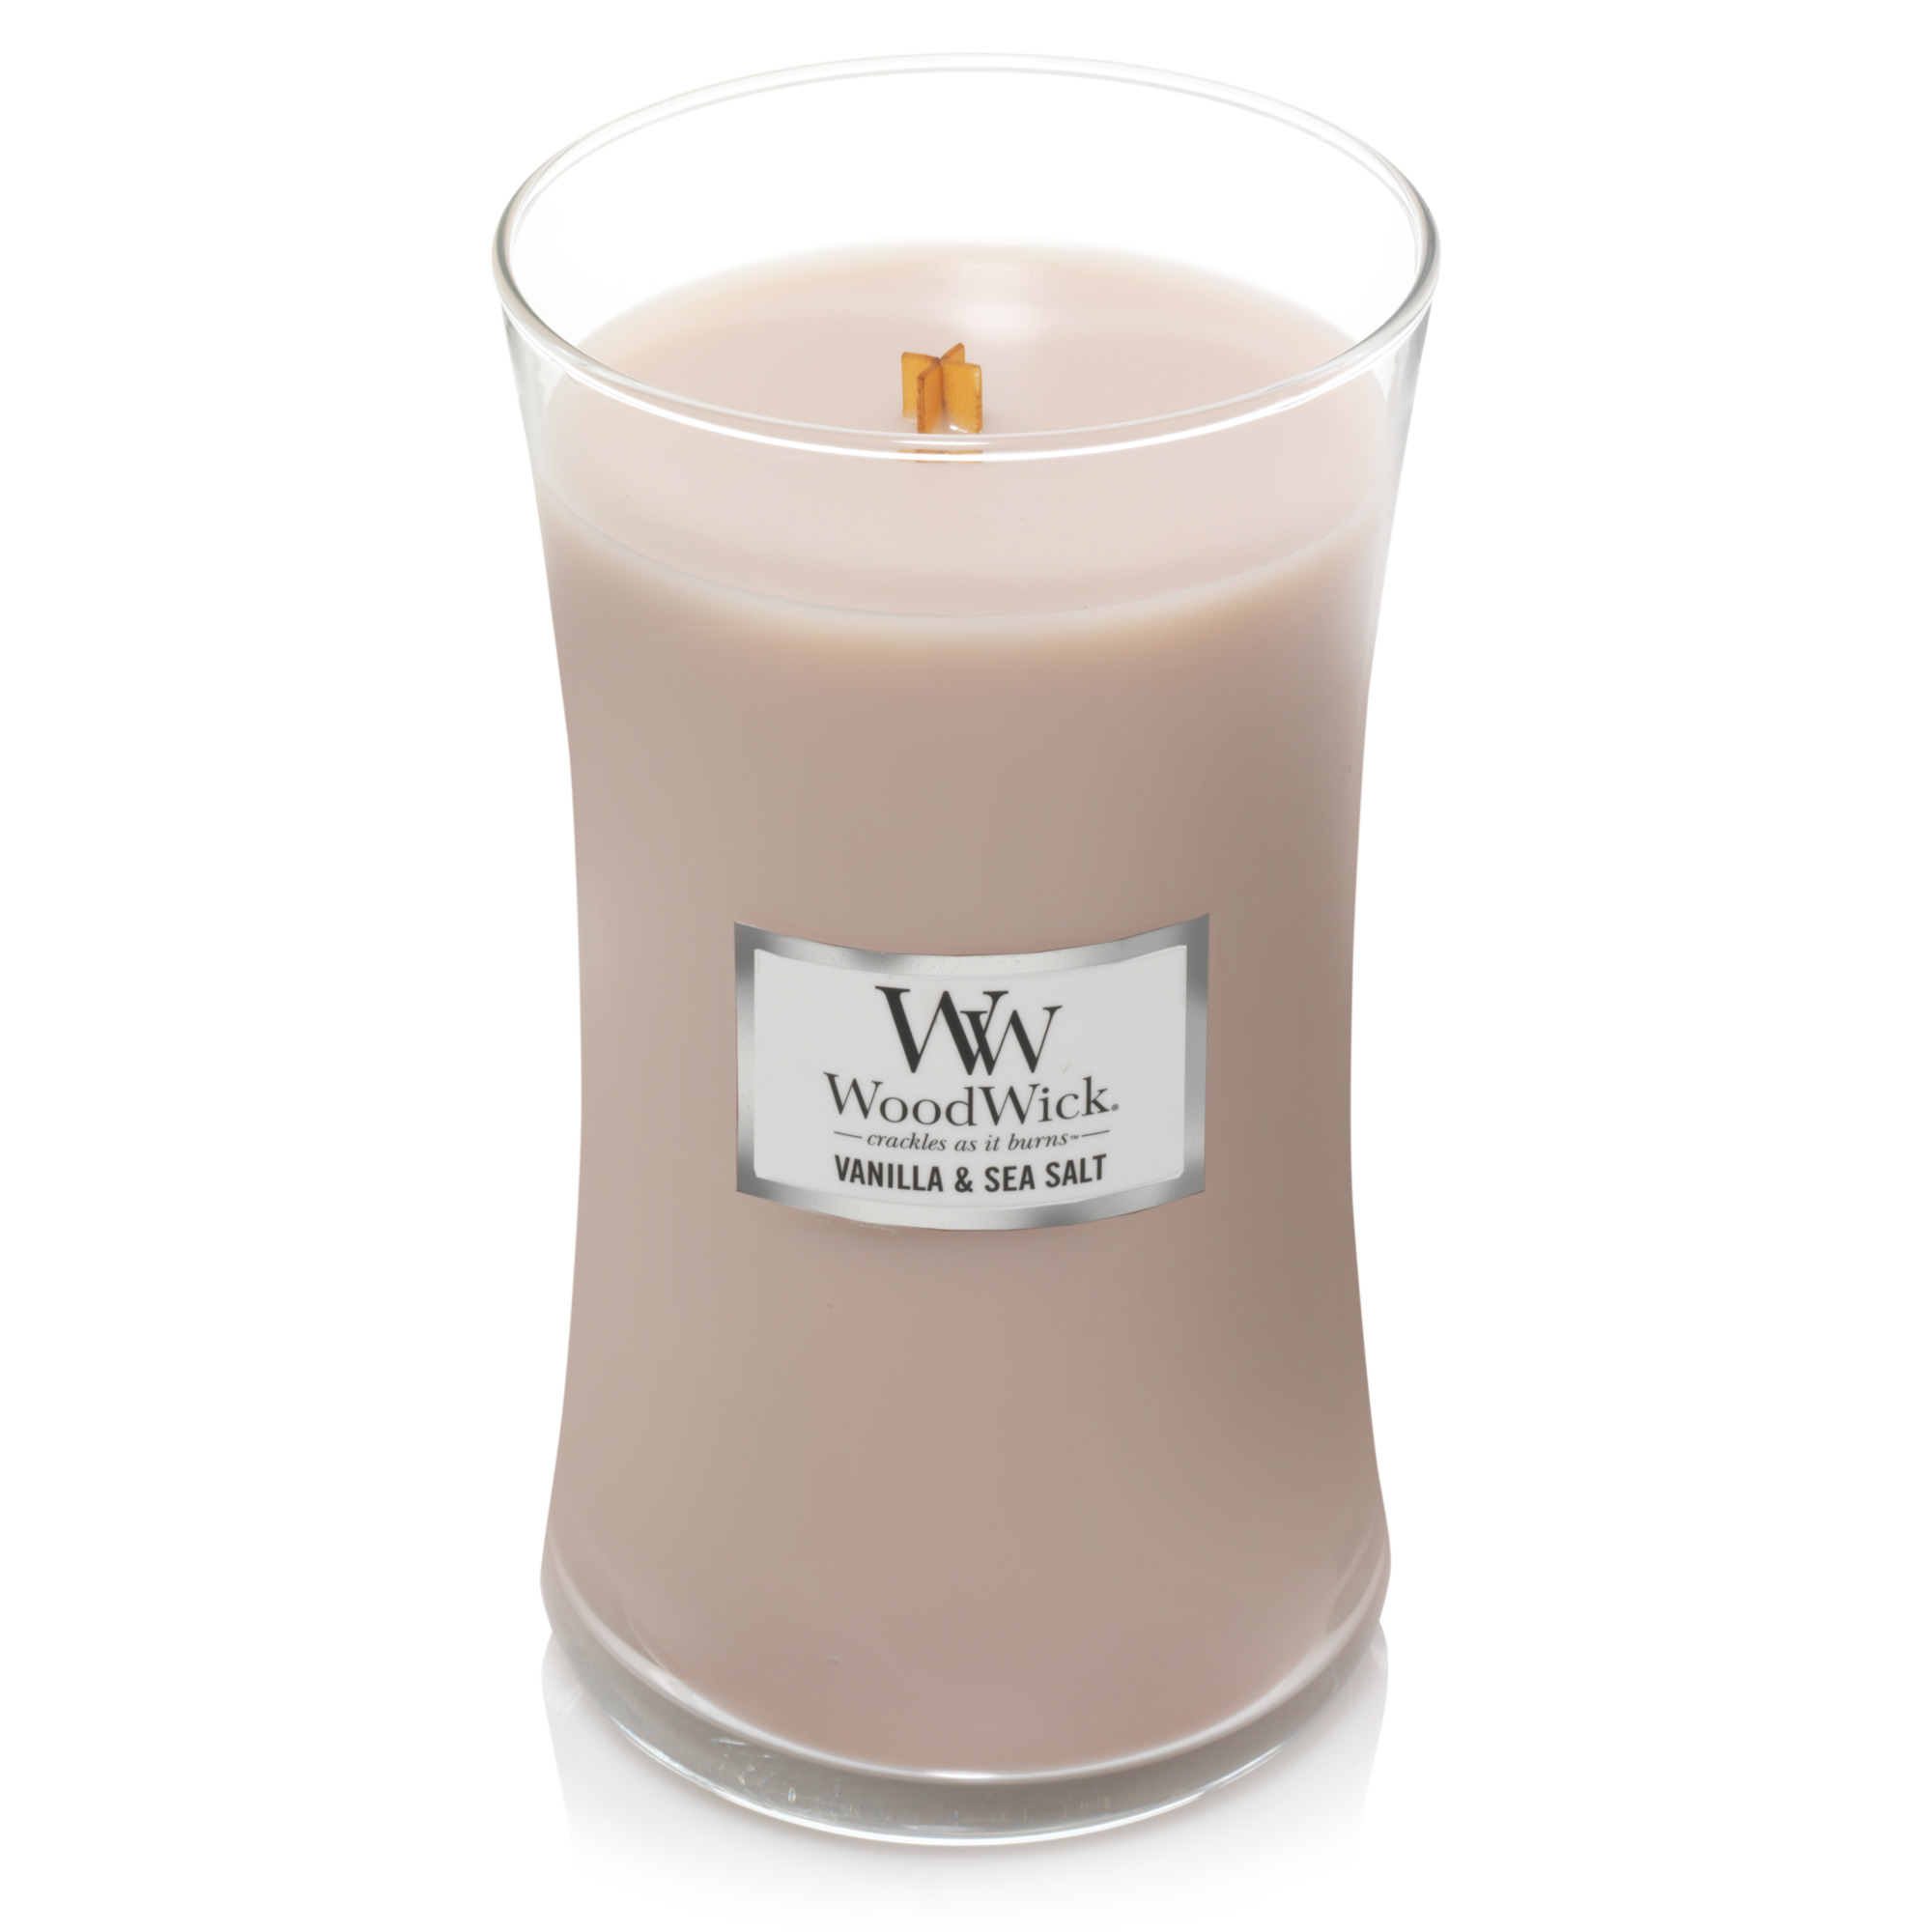 WoodWick Vanilla & Sea Salt, Scented Candle, Classic Hourglass Jar, Large 7-inch, 21.5 Ounce - image 5 of 5